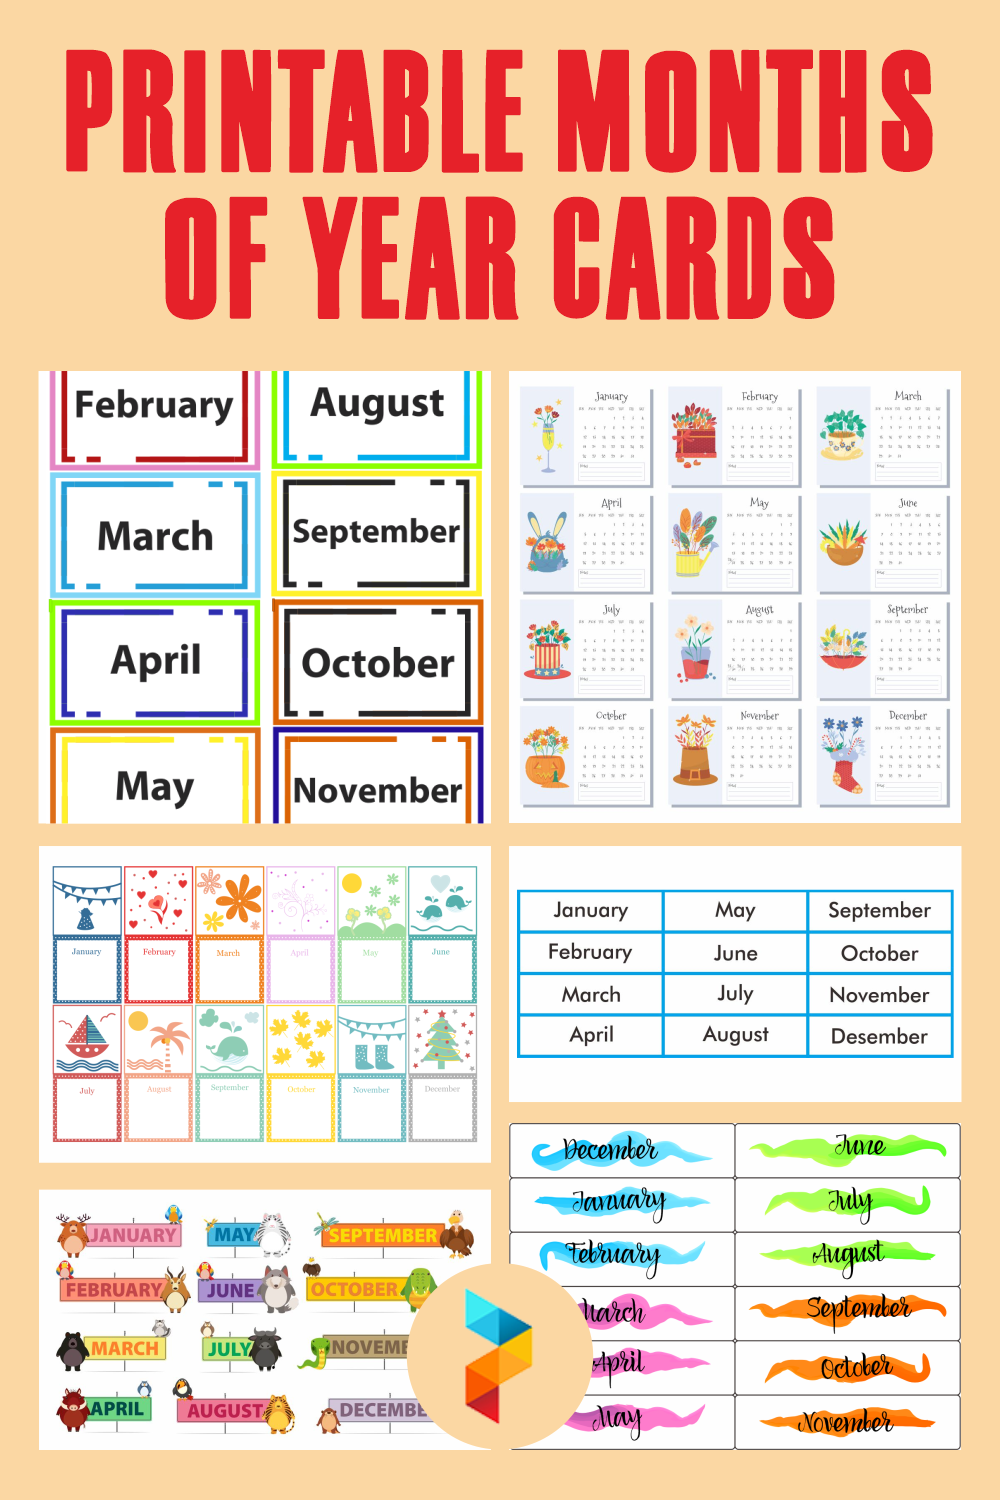 Printable Months Of Year Cards